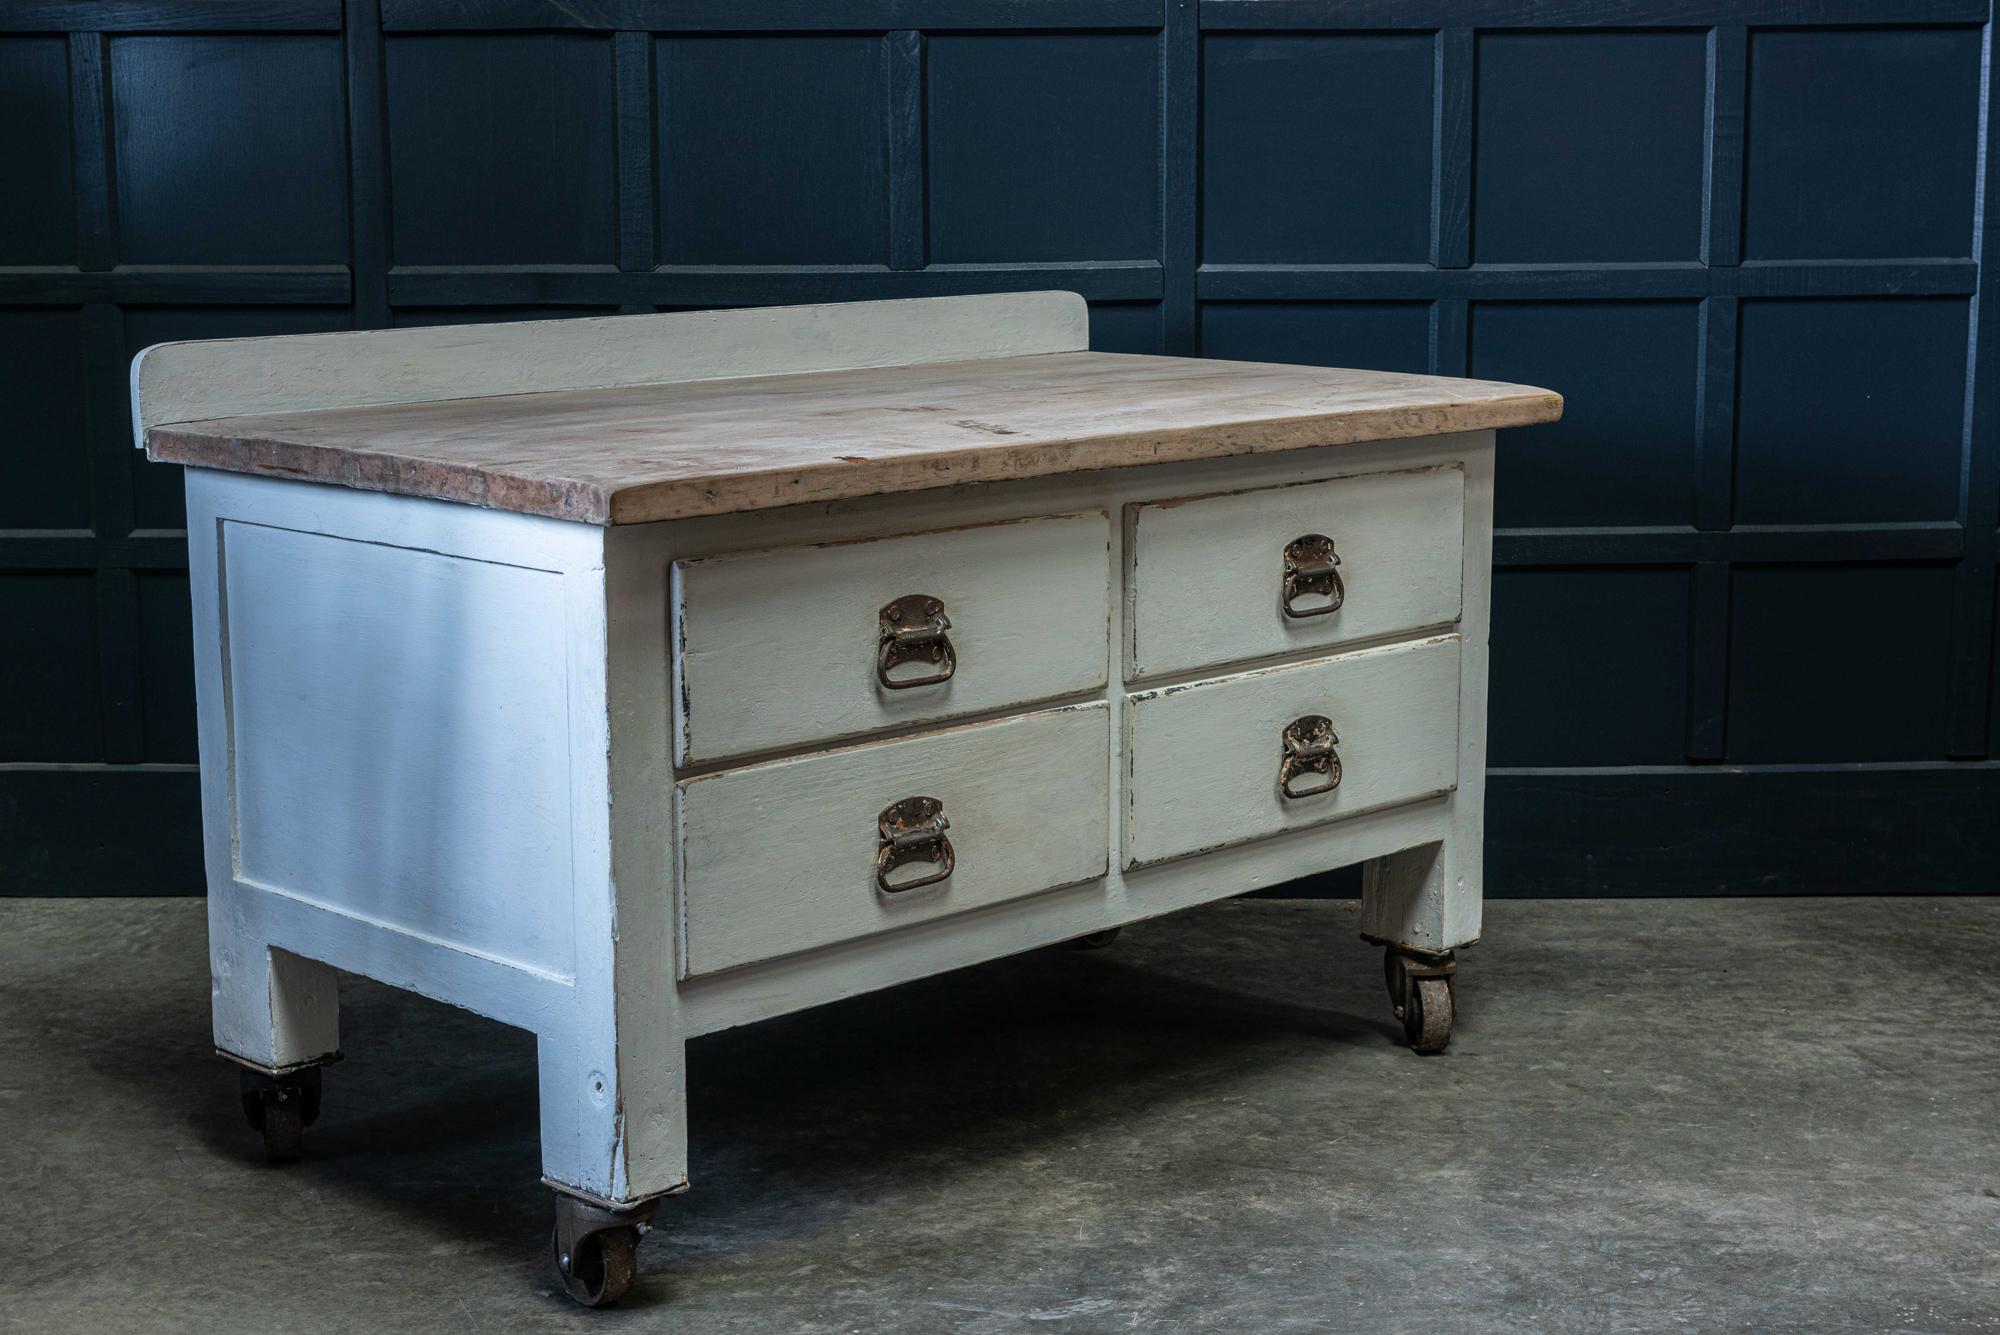 19th century Painted English bakers prep table with 4cm thick scrub elm top and upstand. Four deep dovetailed drawers with original hardware and castors. Ideal in the kitchen as a dividing central kitchen island or against the wall. The colour is